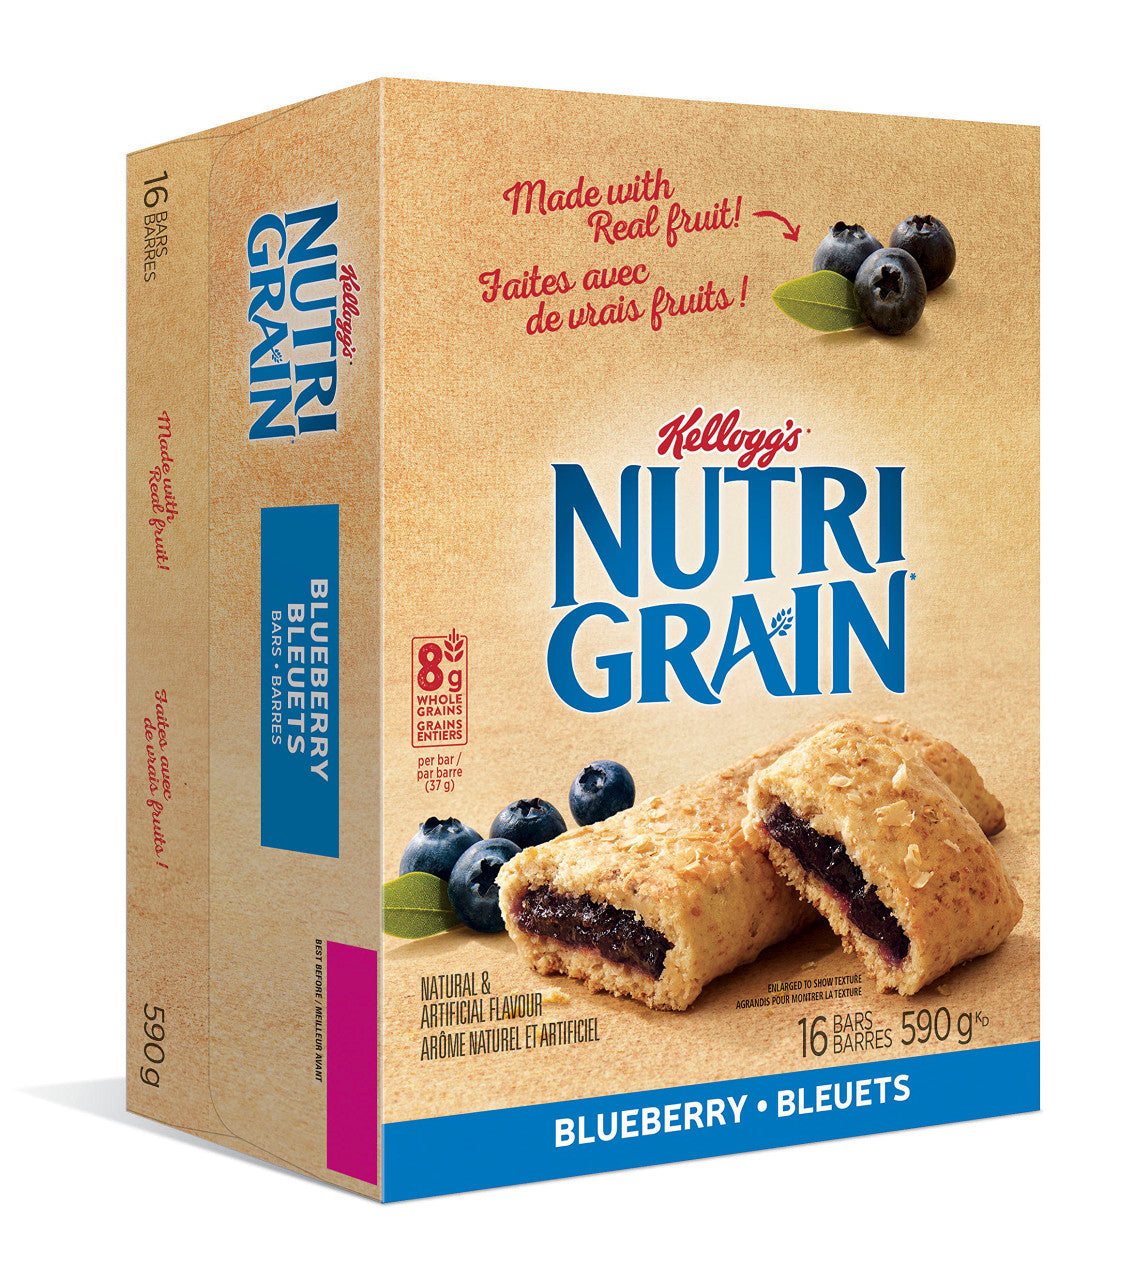 Kellogg's Nutri-Grain Blueberry 16 bars, 590g/20.81 oz., {Imported from Canada}